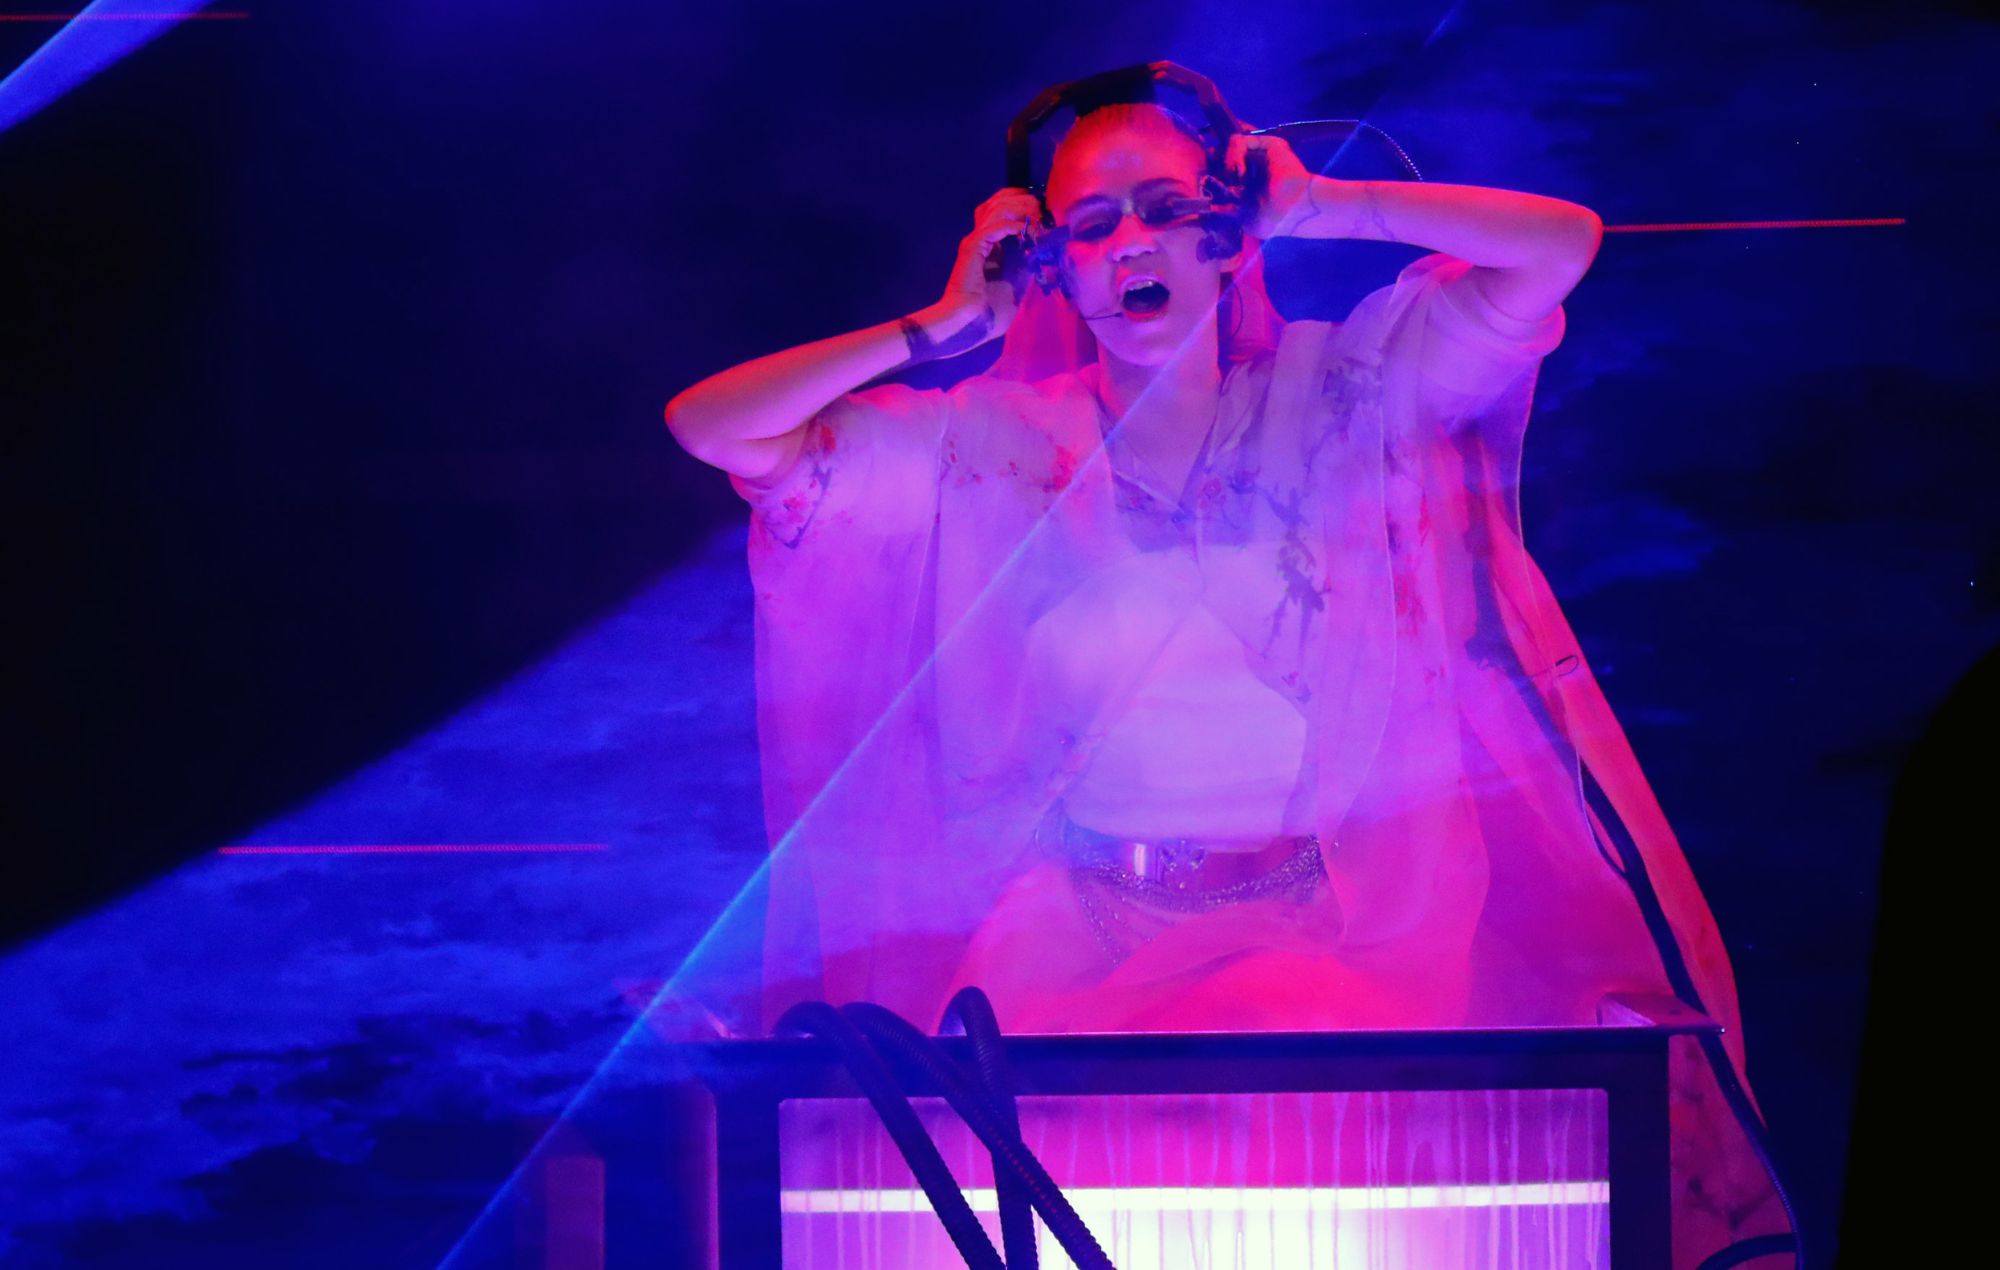 Grimes’ DJ set at Coachella mired by technical difficulties, social media reacts